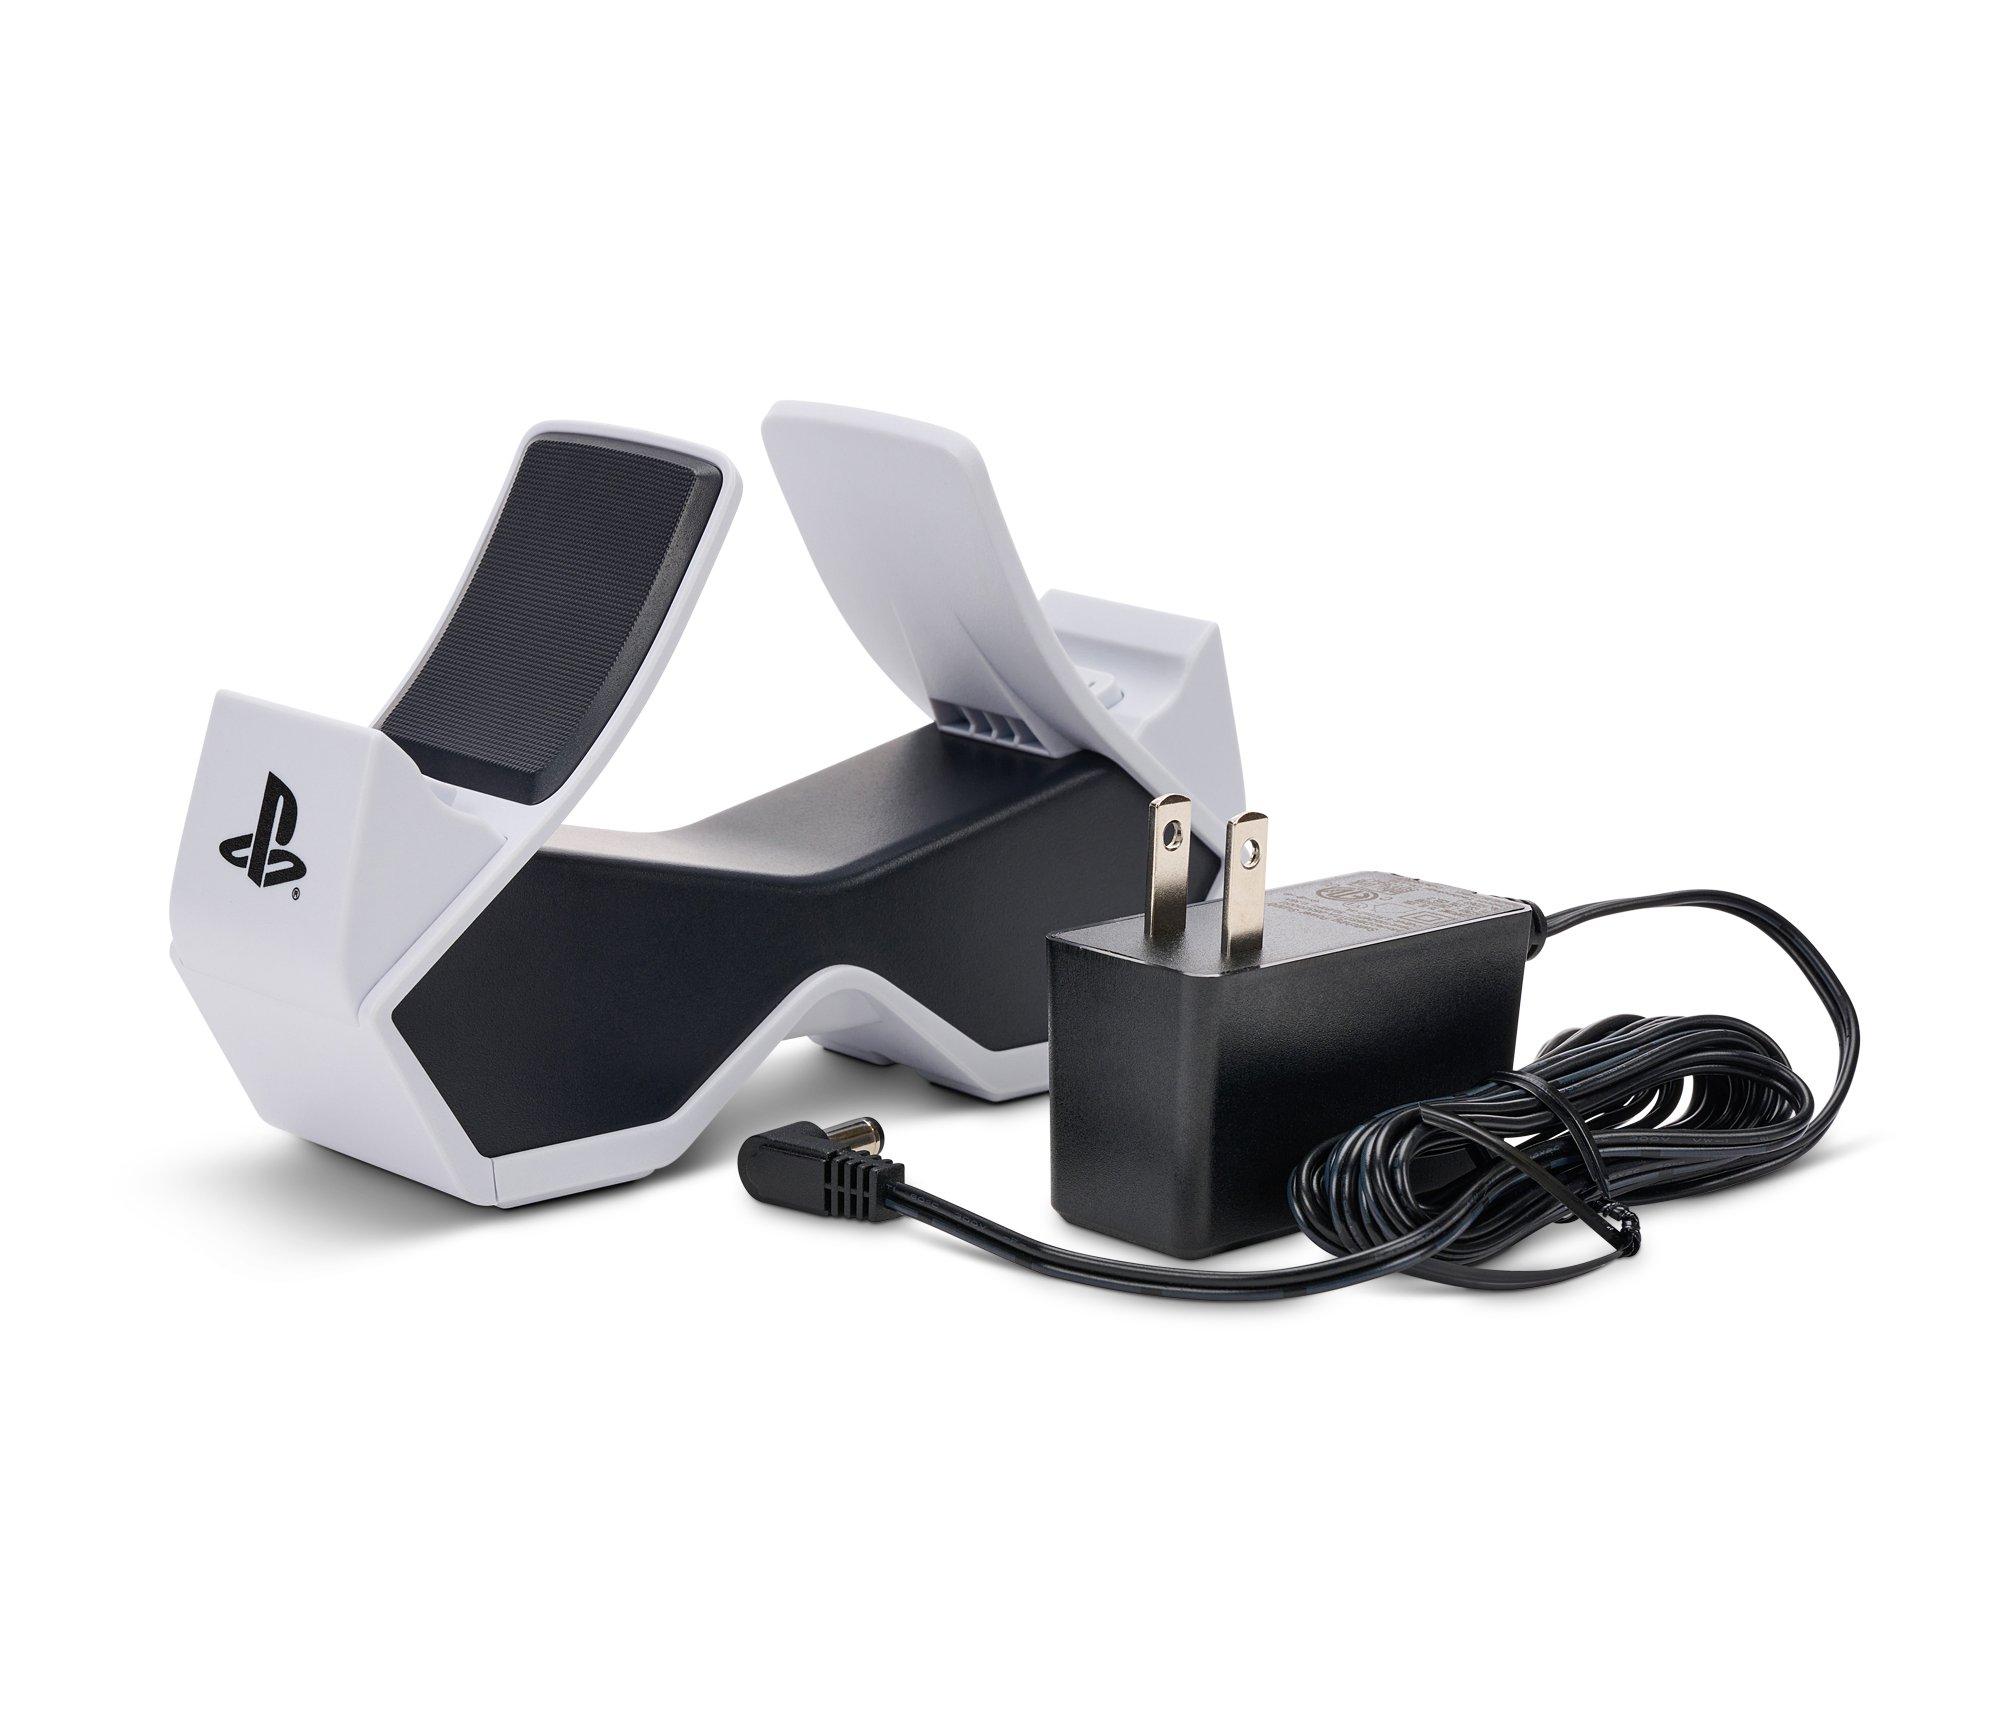 DualSense Charging Station for PlayStation 5